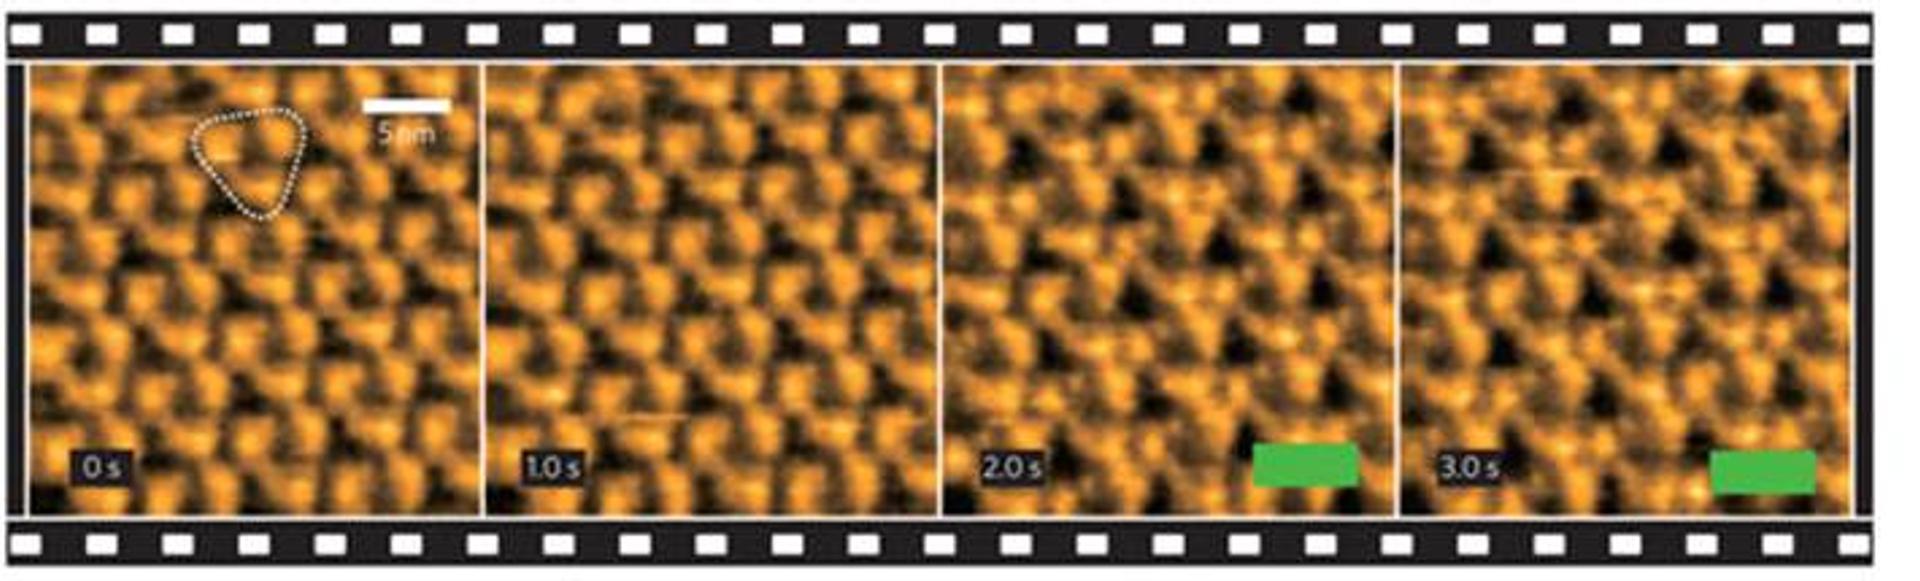 Successive high-speed AFM images of bacteriorhodopsin proteins